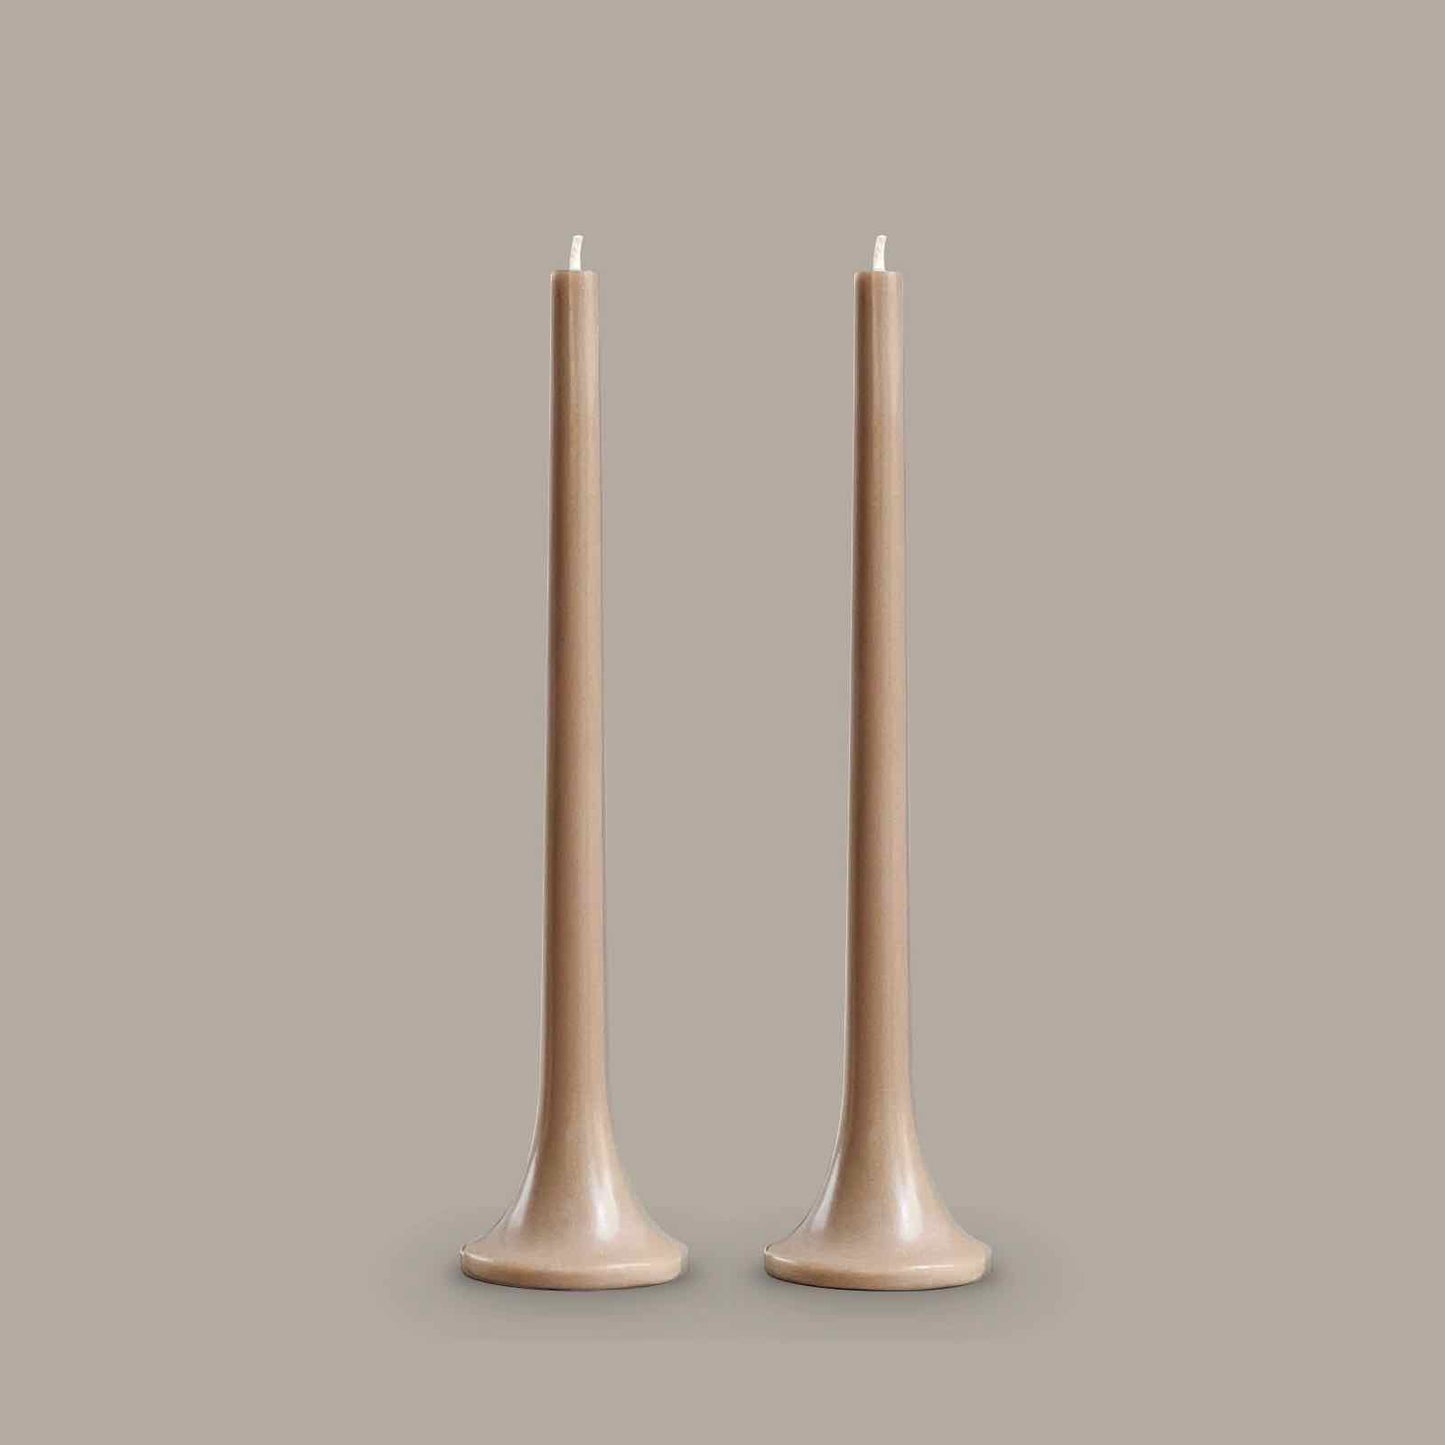 Neutral brown taper candles